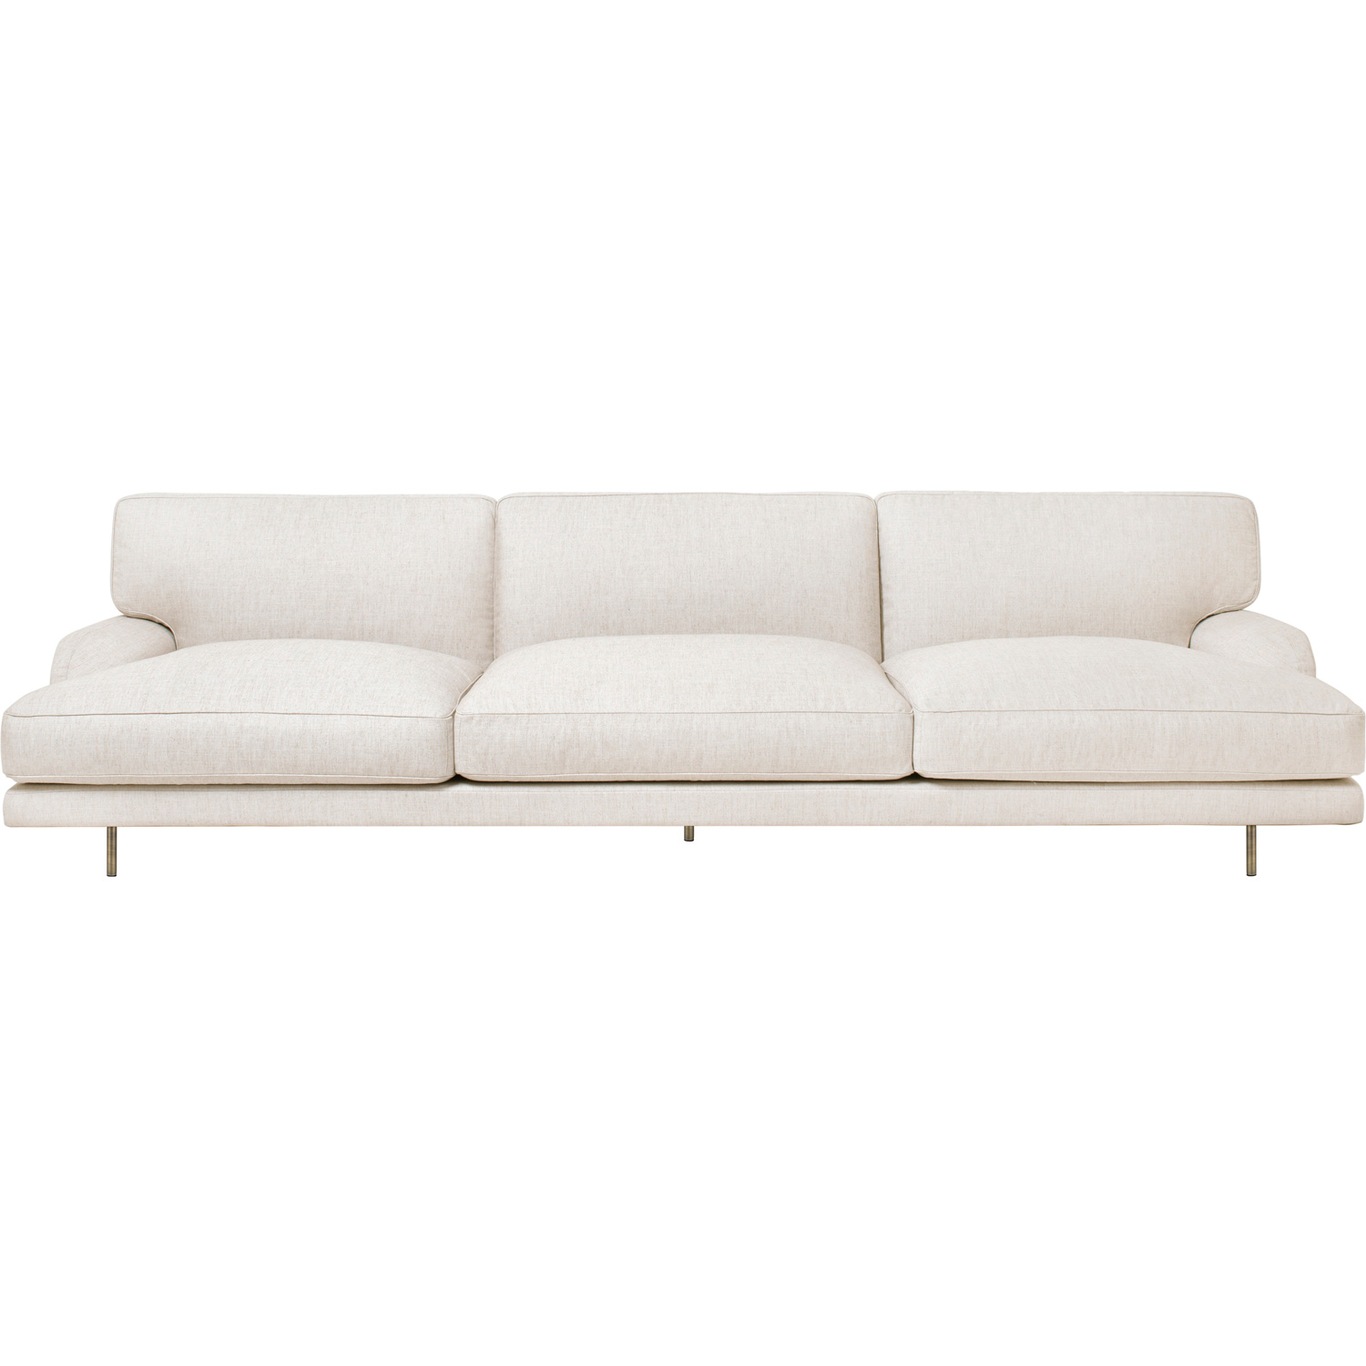 Flaneur Sofa FC 3-Seater, Legs Brass / Hot Madison 419 Off White